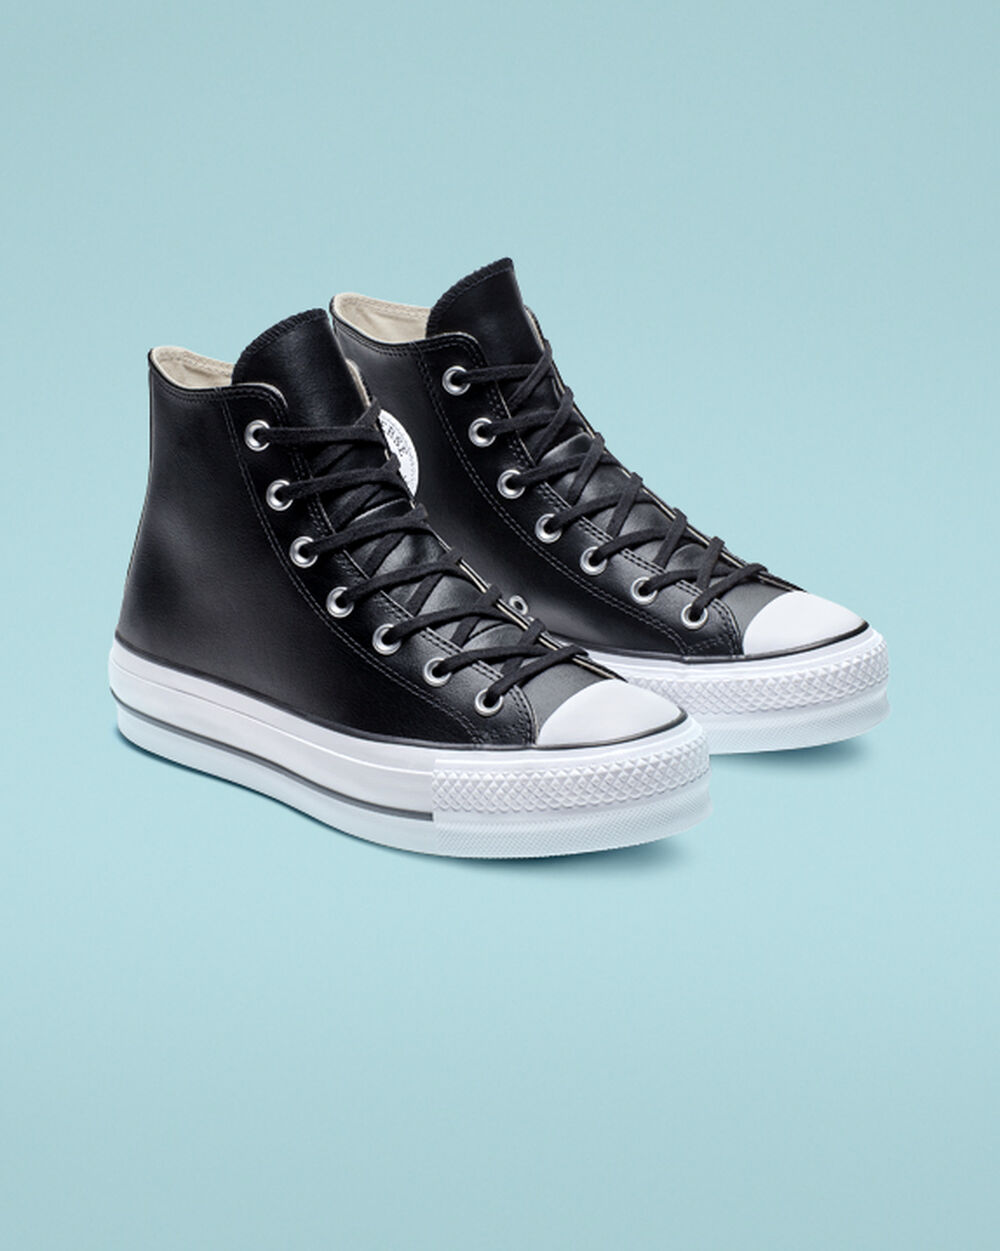 Tenis Converse Chuck Taylor All Star Mujer Negros Blancos | Mexico-706156